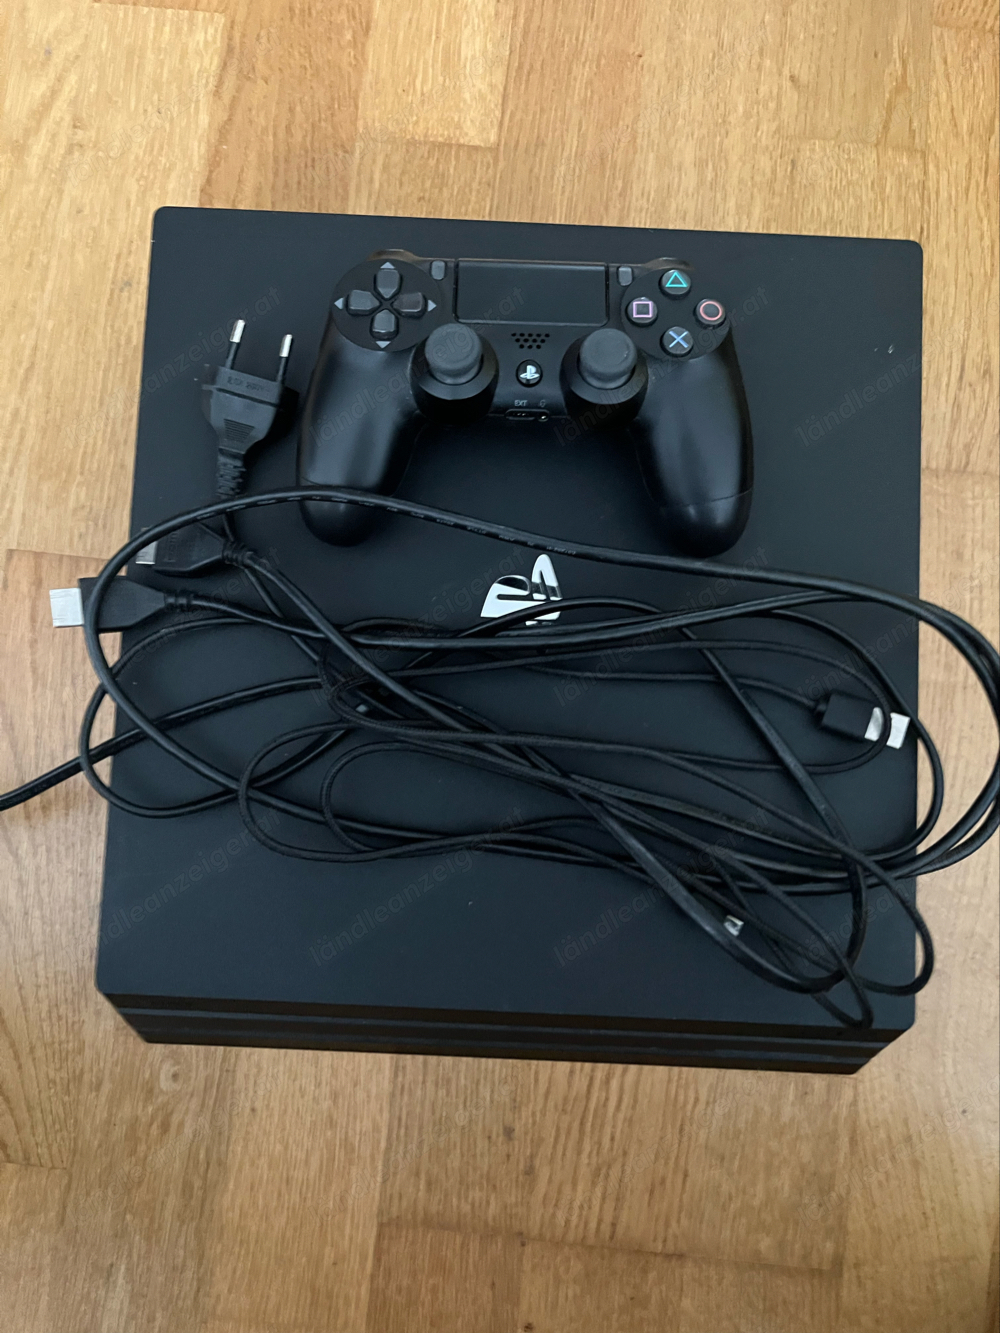 Ps4 pro mit controller